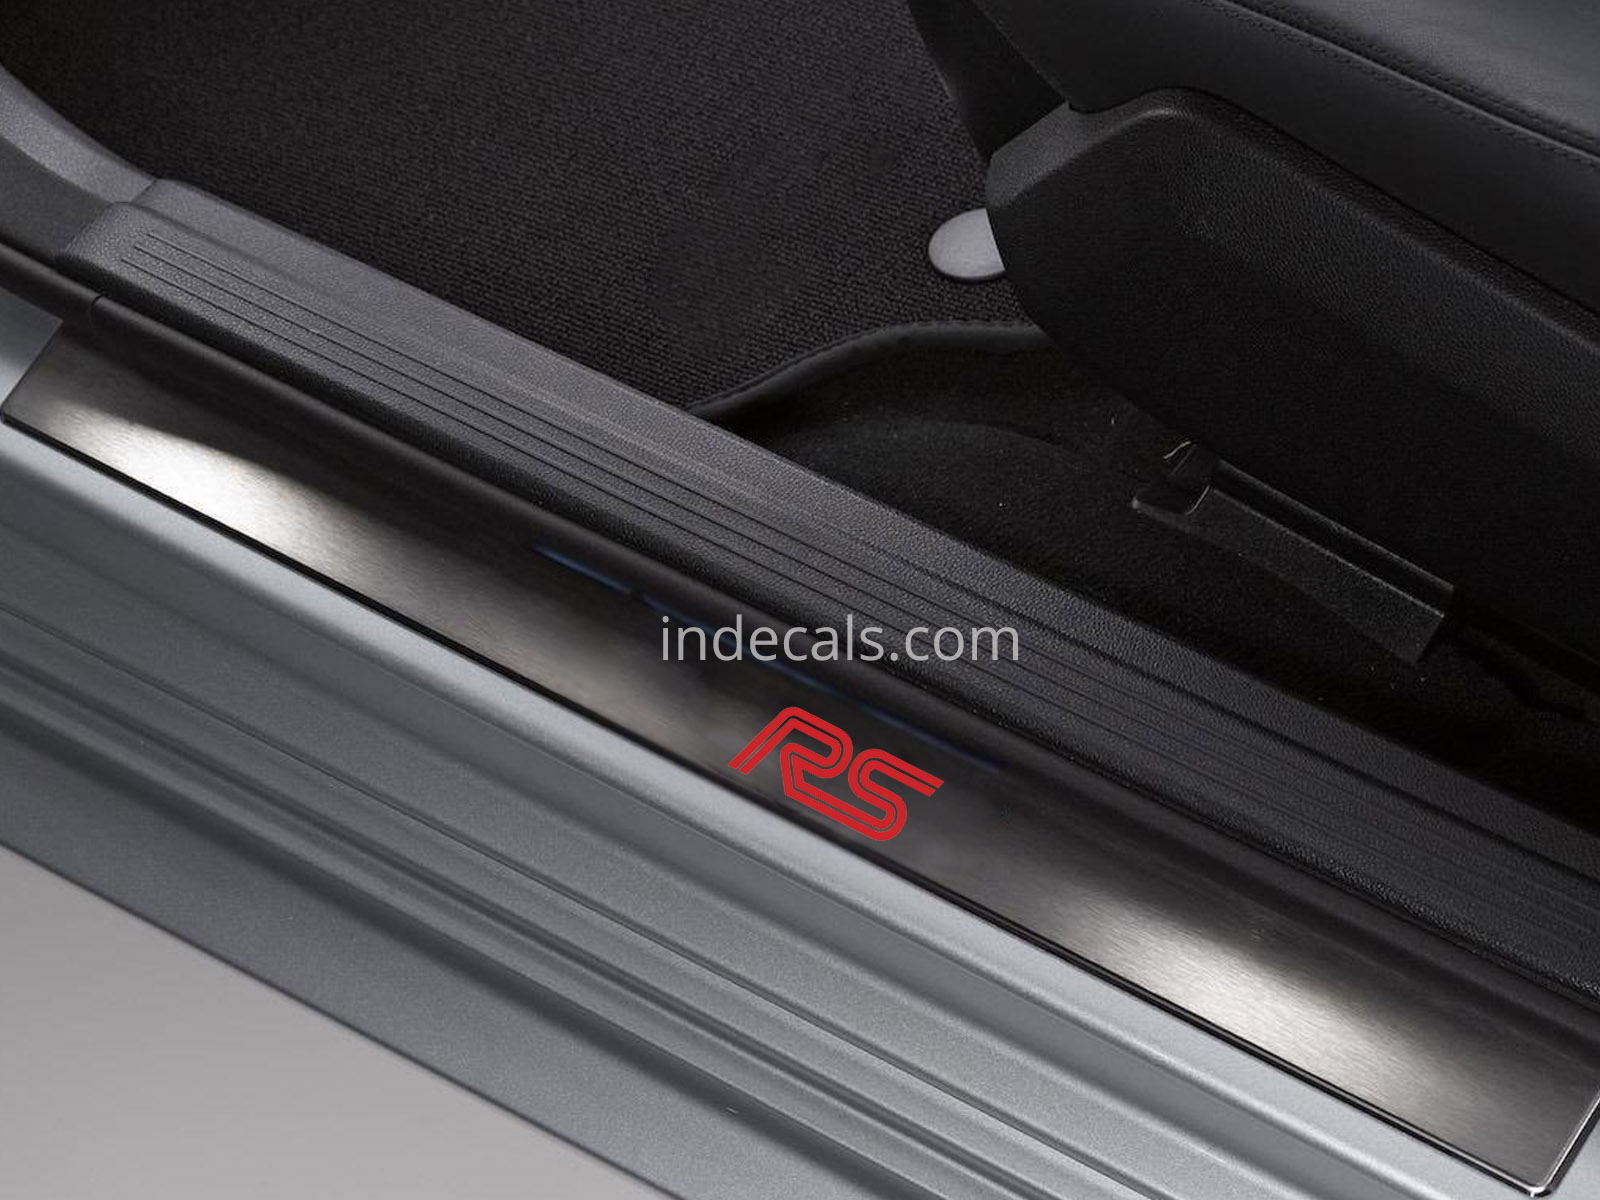 6 x Ford RS Stickers for Door Sills - Red